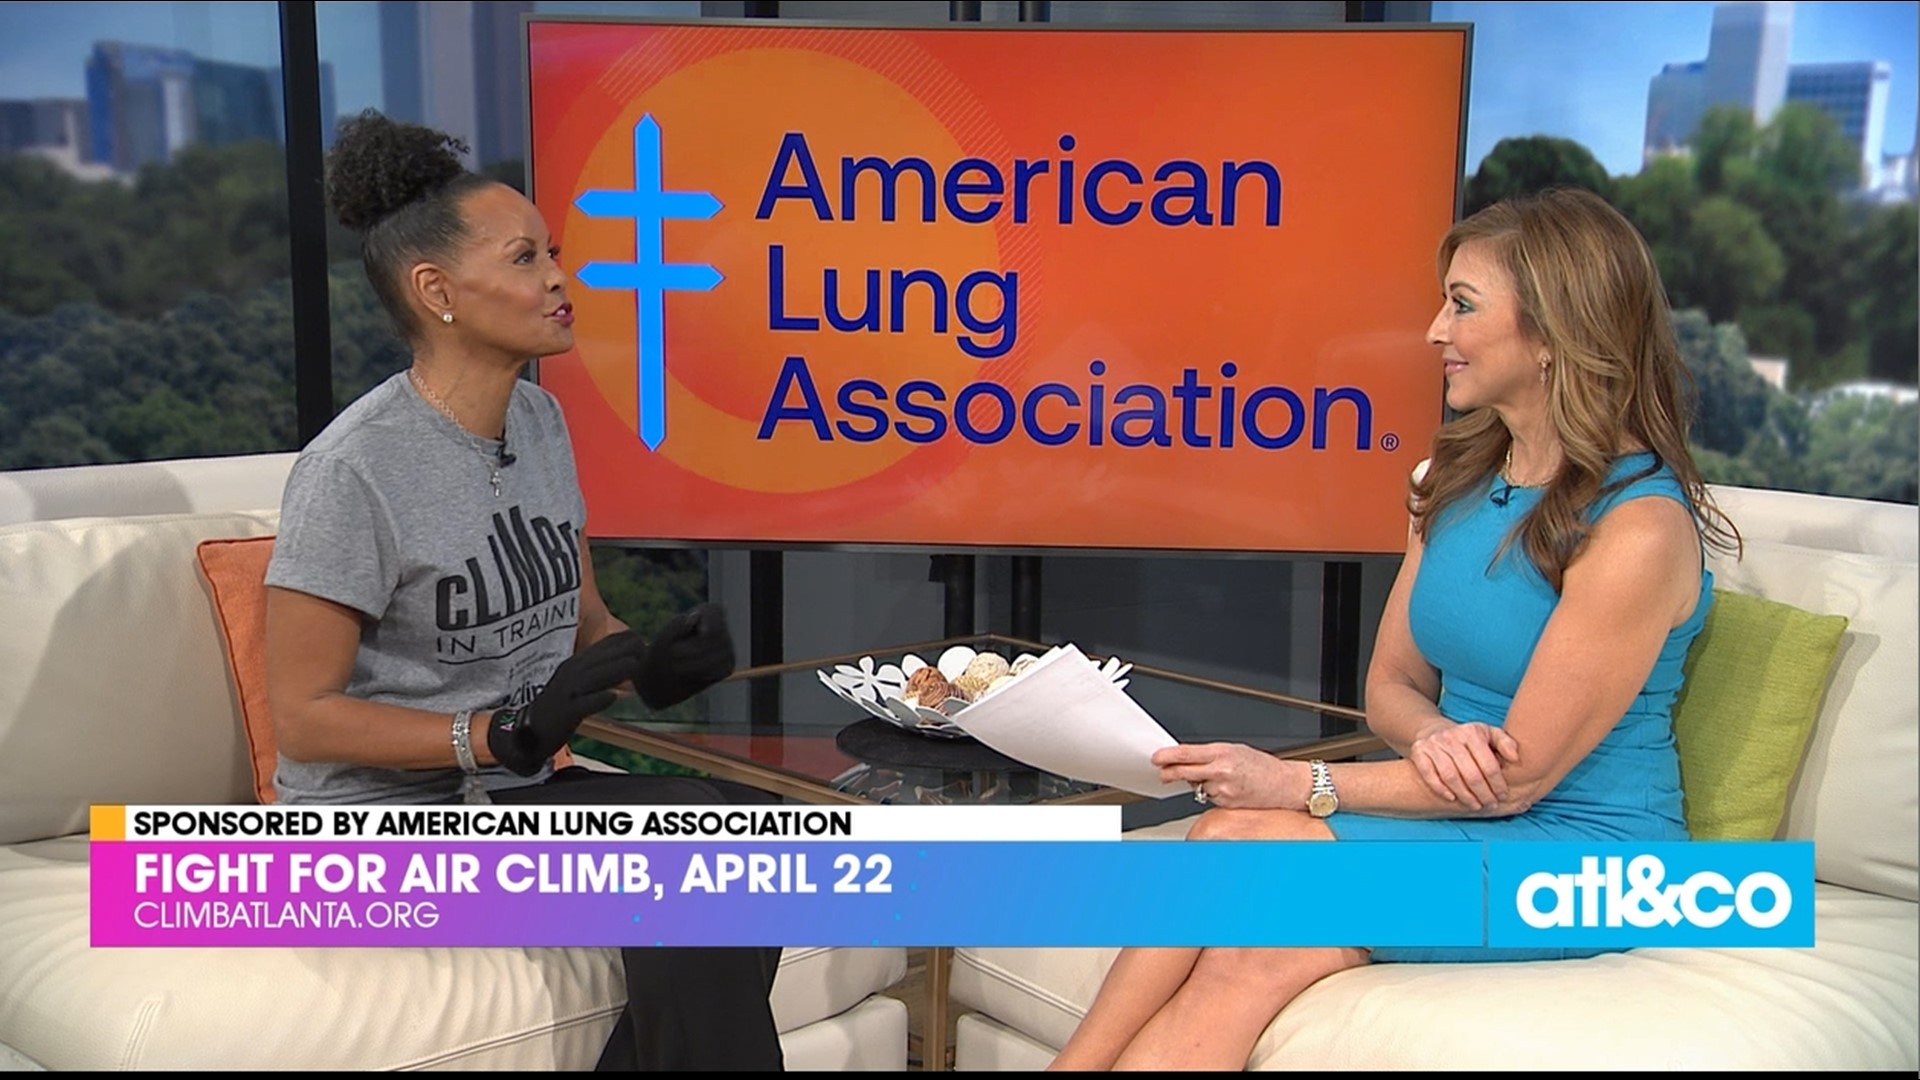 Lung disease survivor Lovette Russell shares her story and previews American Lung Association's Fight for Air Climb.